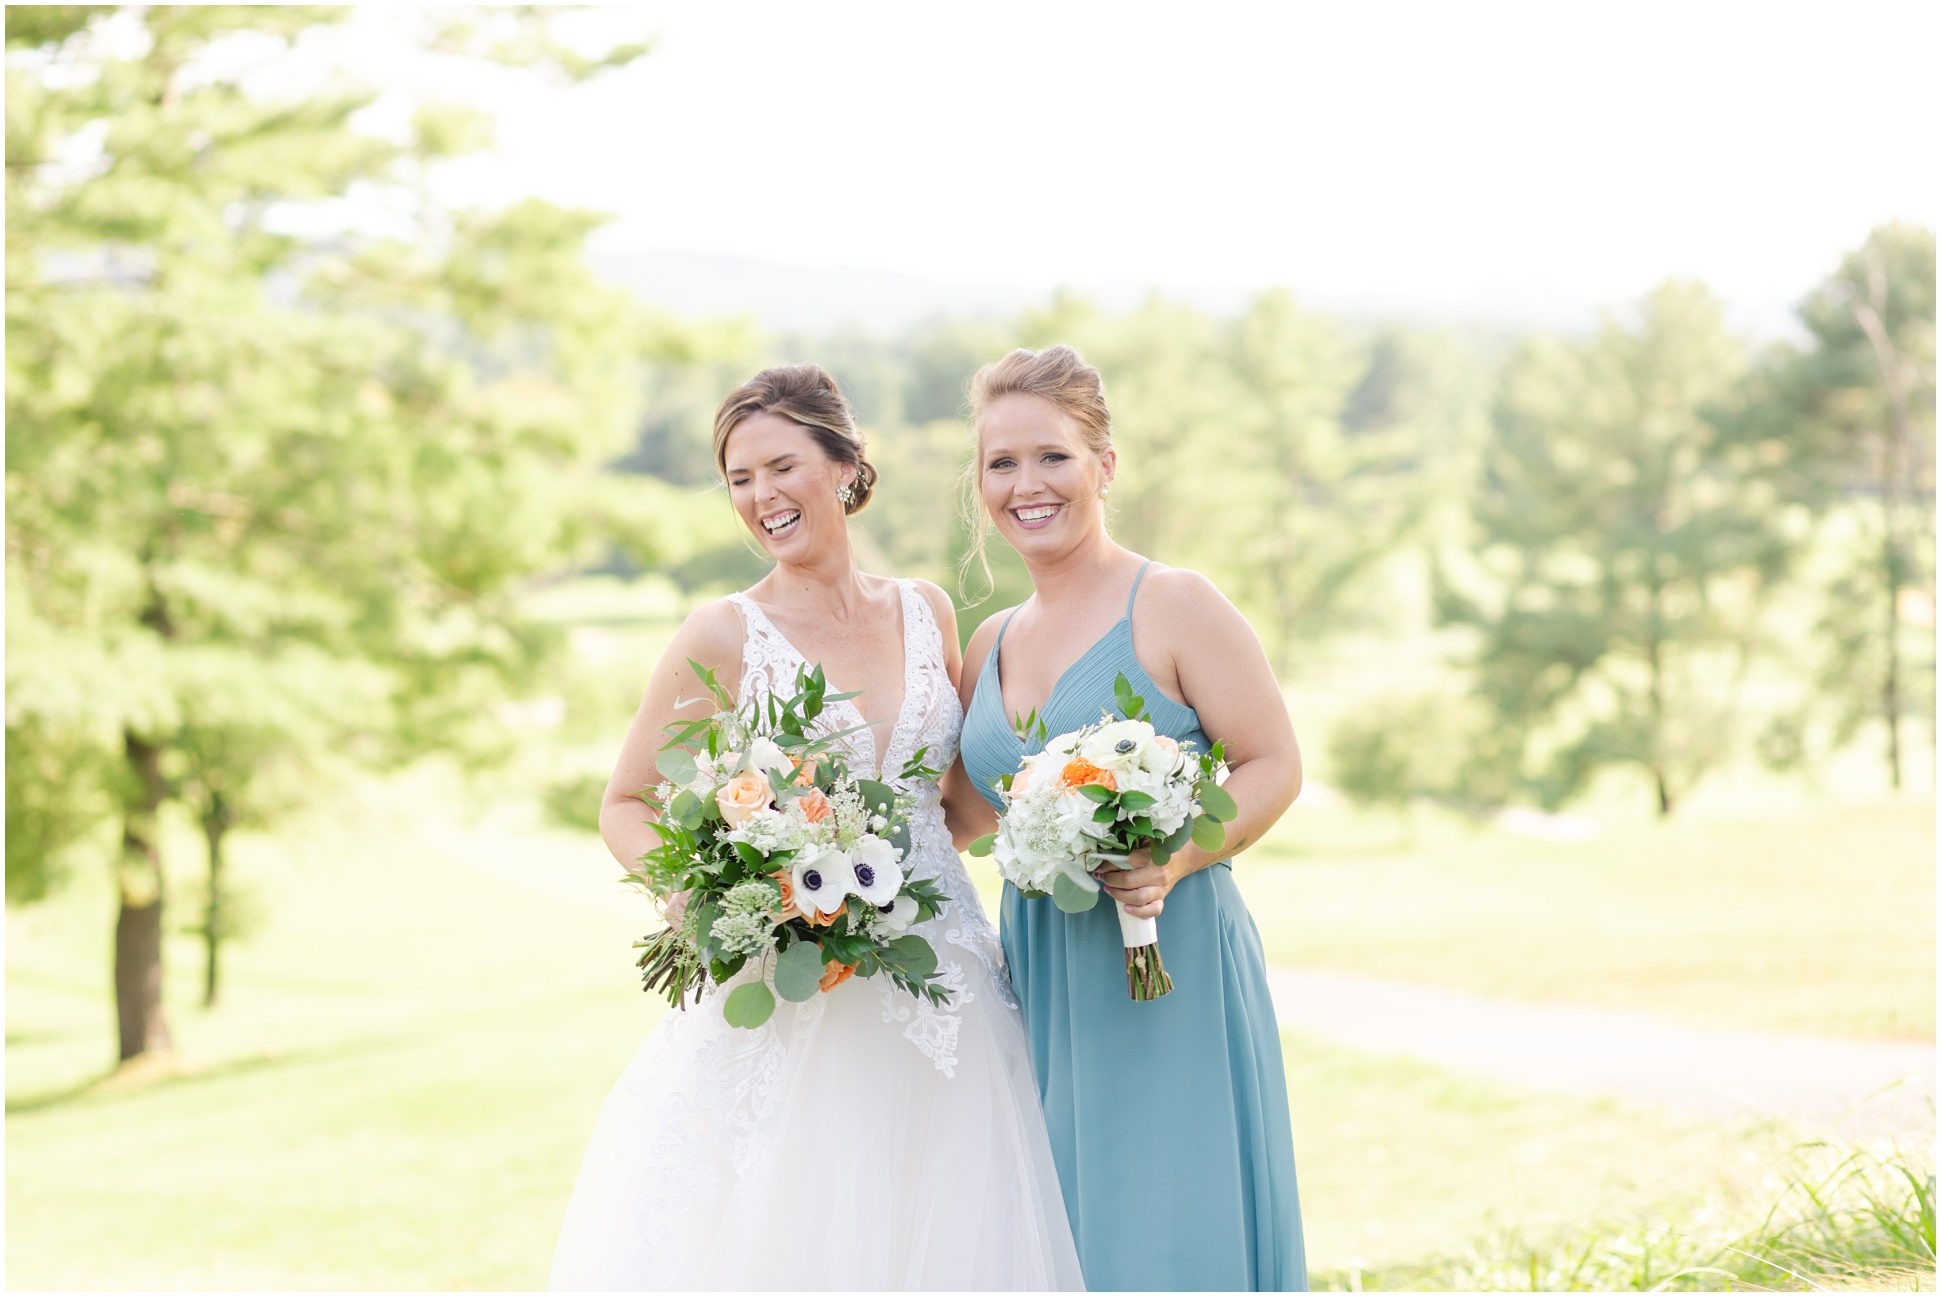 Bride and Maid of Honor Laughing. Maid of Honor wearing blue dress.